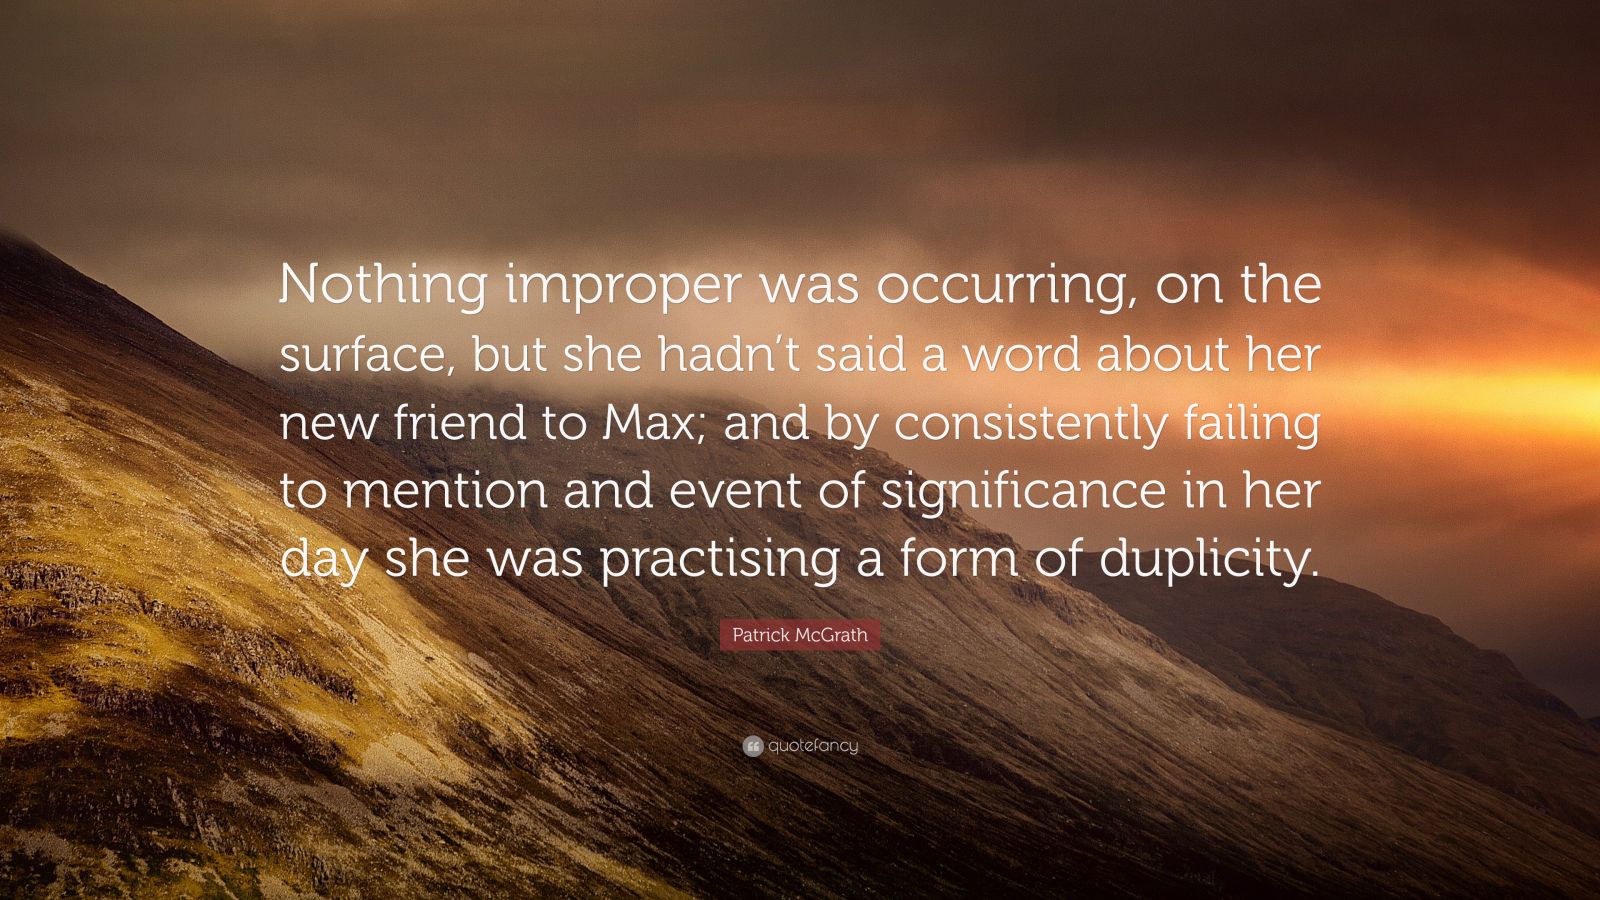 Patrick McGrath Quote: “Nothing improper was occurring, on the surface ...